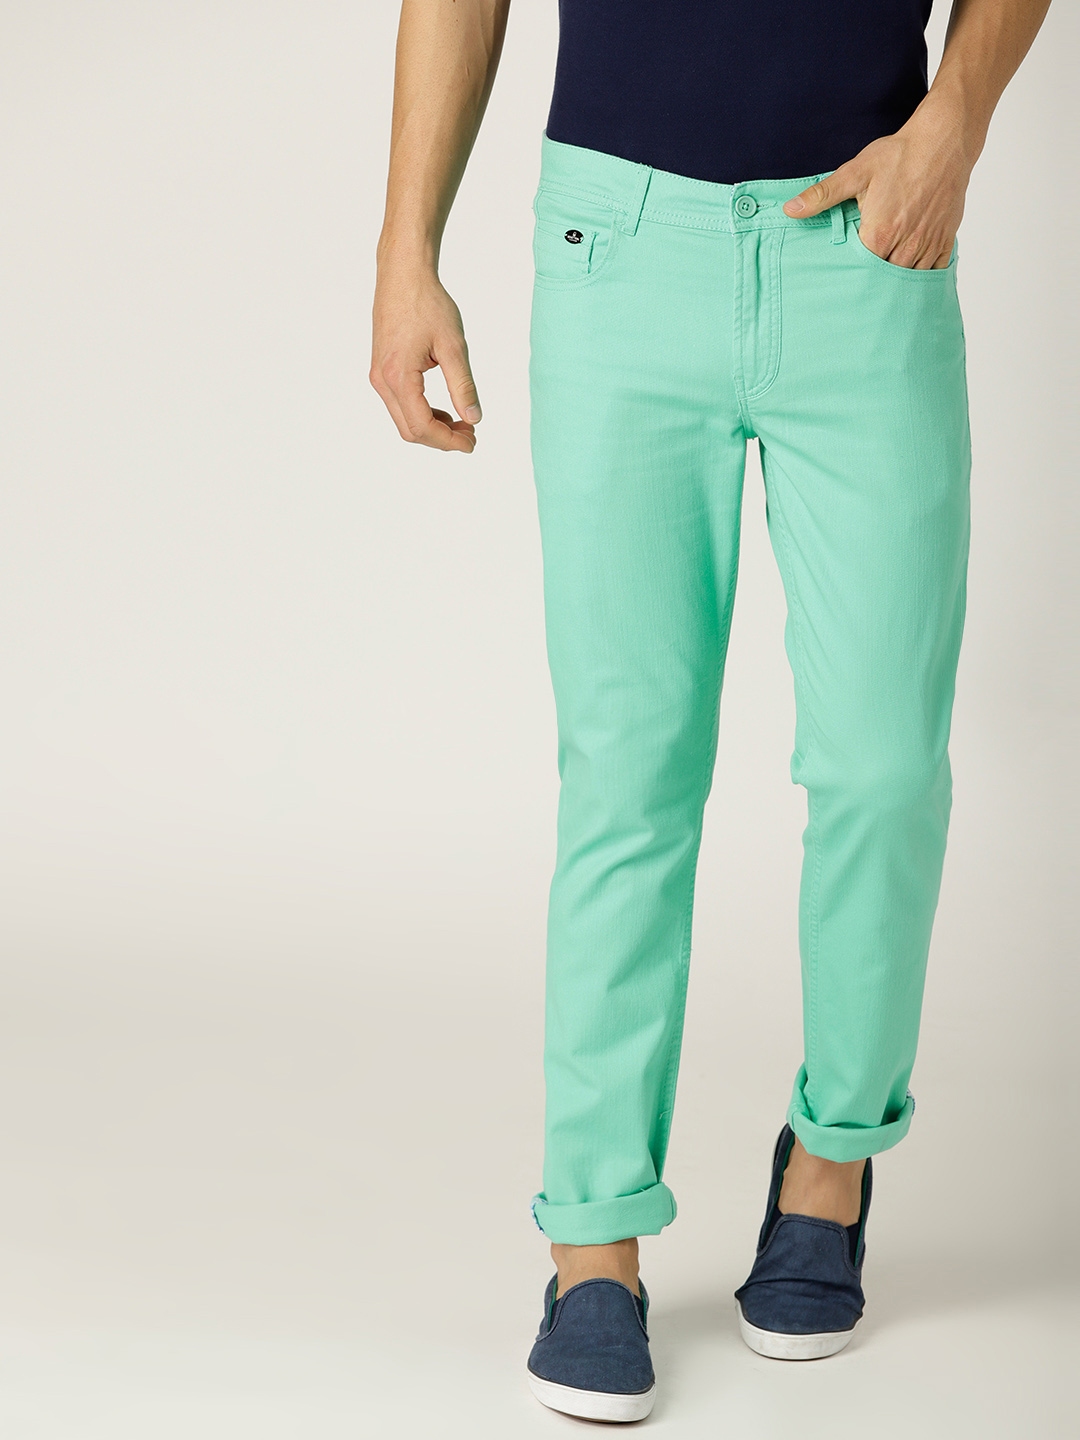 Buy United Colors Of Benetton Men Beige Tapered Fit Solid Trousers   Trousers for Men 7176333  Myntra